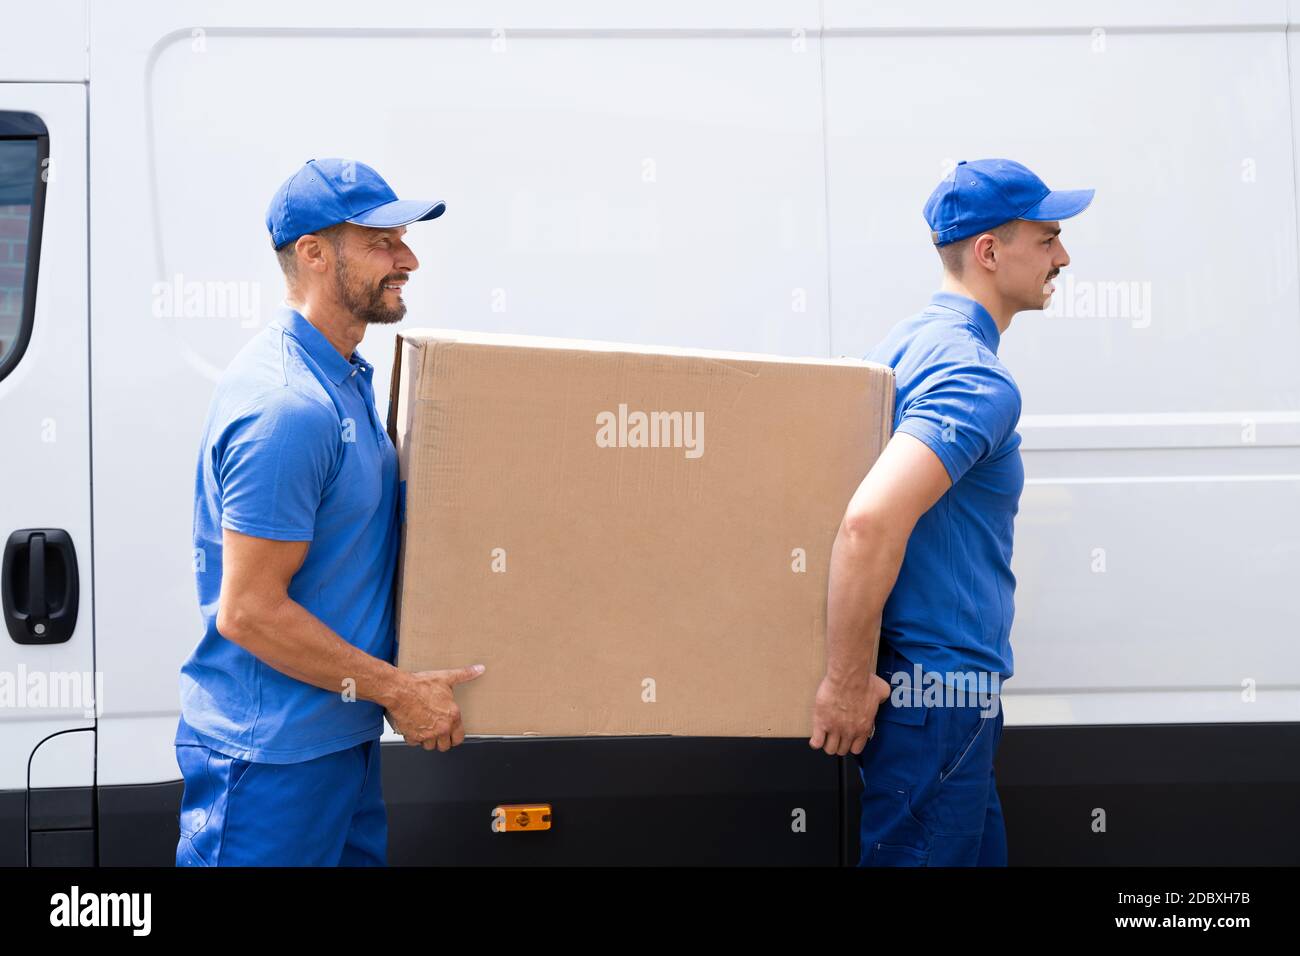 Delivery And Removal. 2 Movers Near Van. Side View Stock Photo